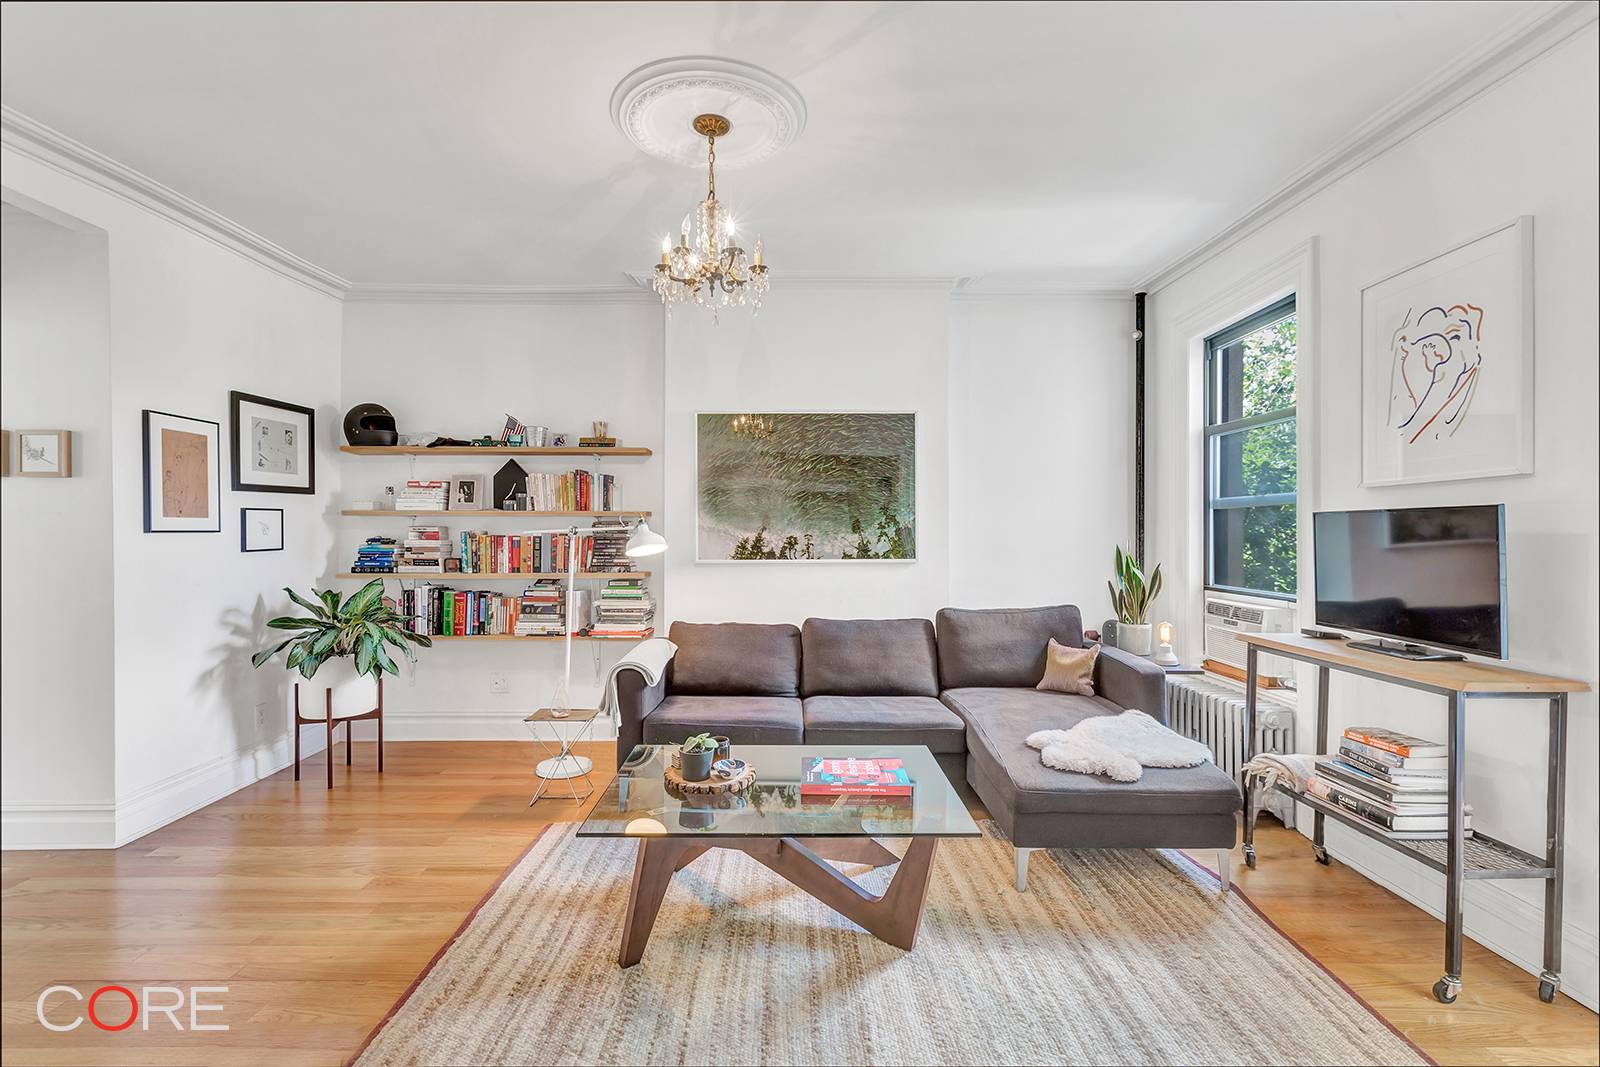 Available June 1st. This full floor, one bedroom apartment with a home office is located in a beautiful brownstone that has been completely renovated to perfection.